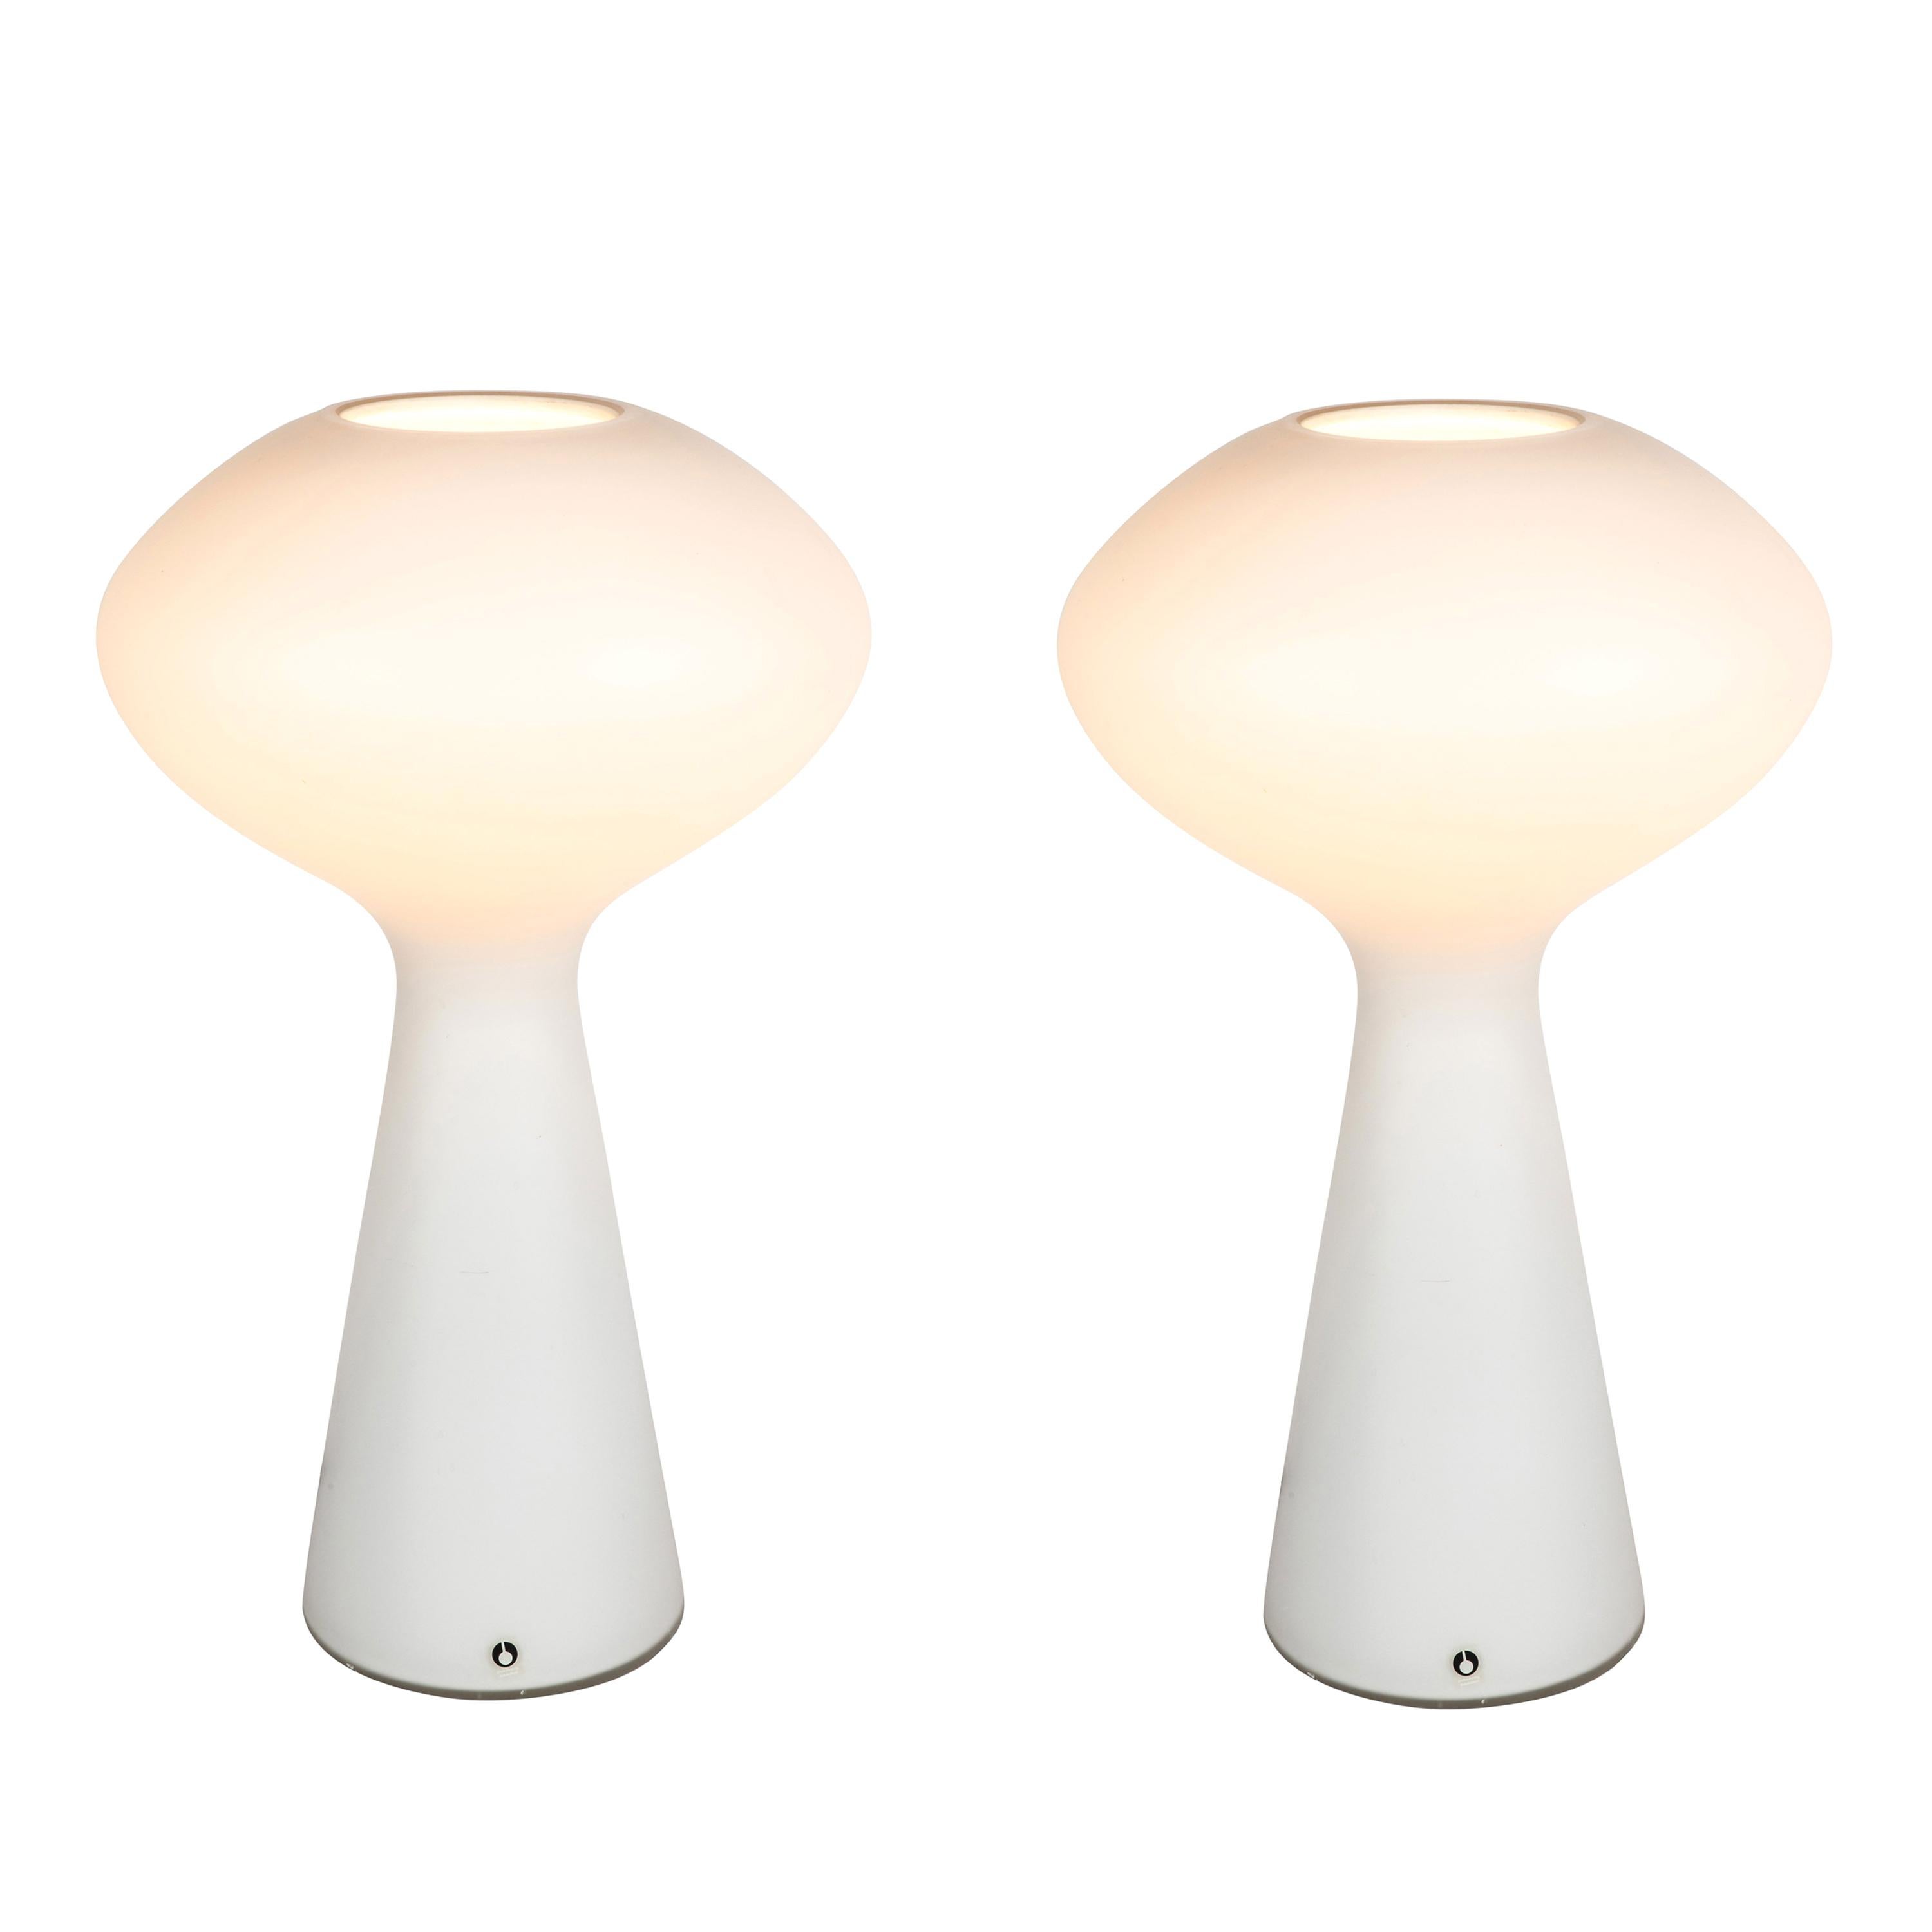 Pair of 1950s Lisa Johansson-Pape Table Lamps for Iittala